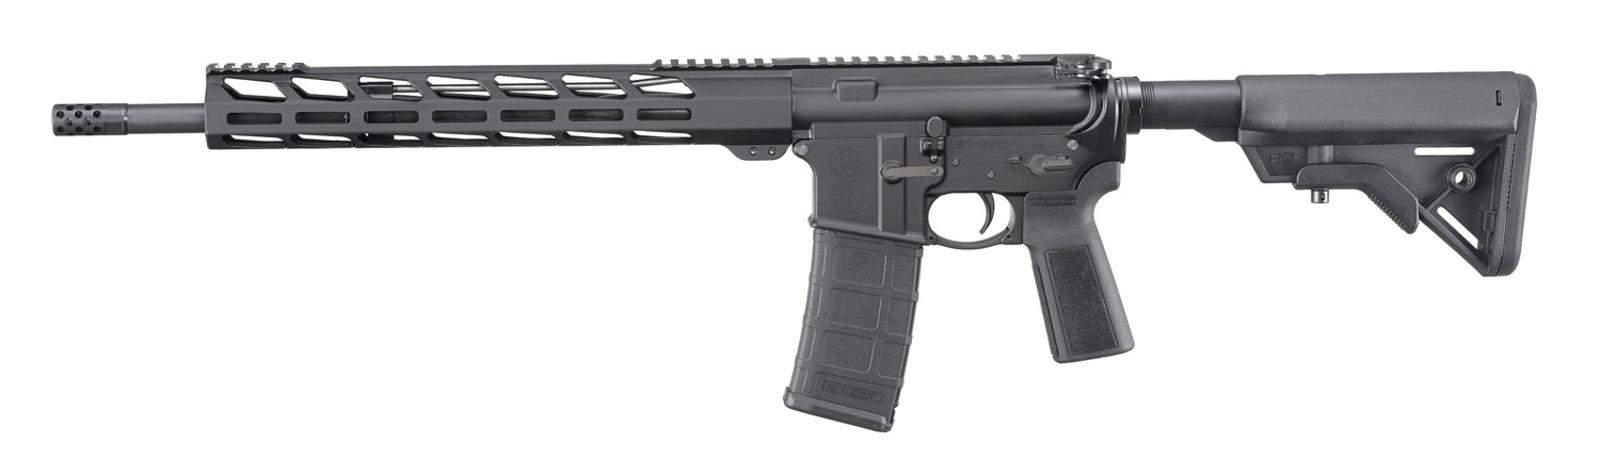 Ruger® AR-556® MPR Autoloading Rifle Model 8542